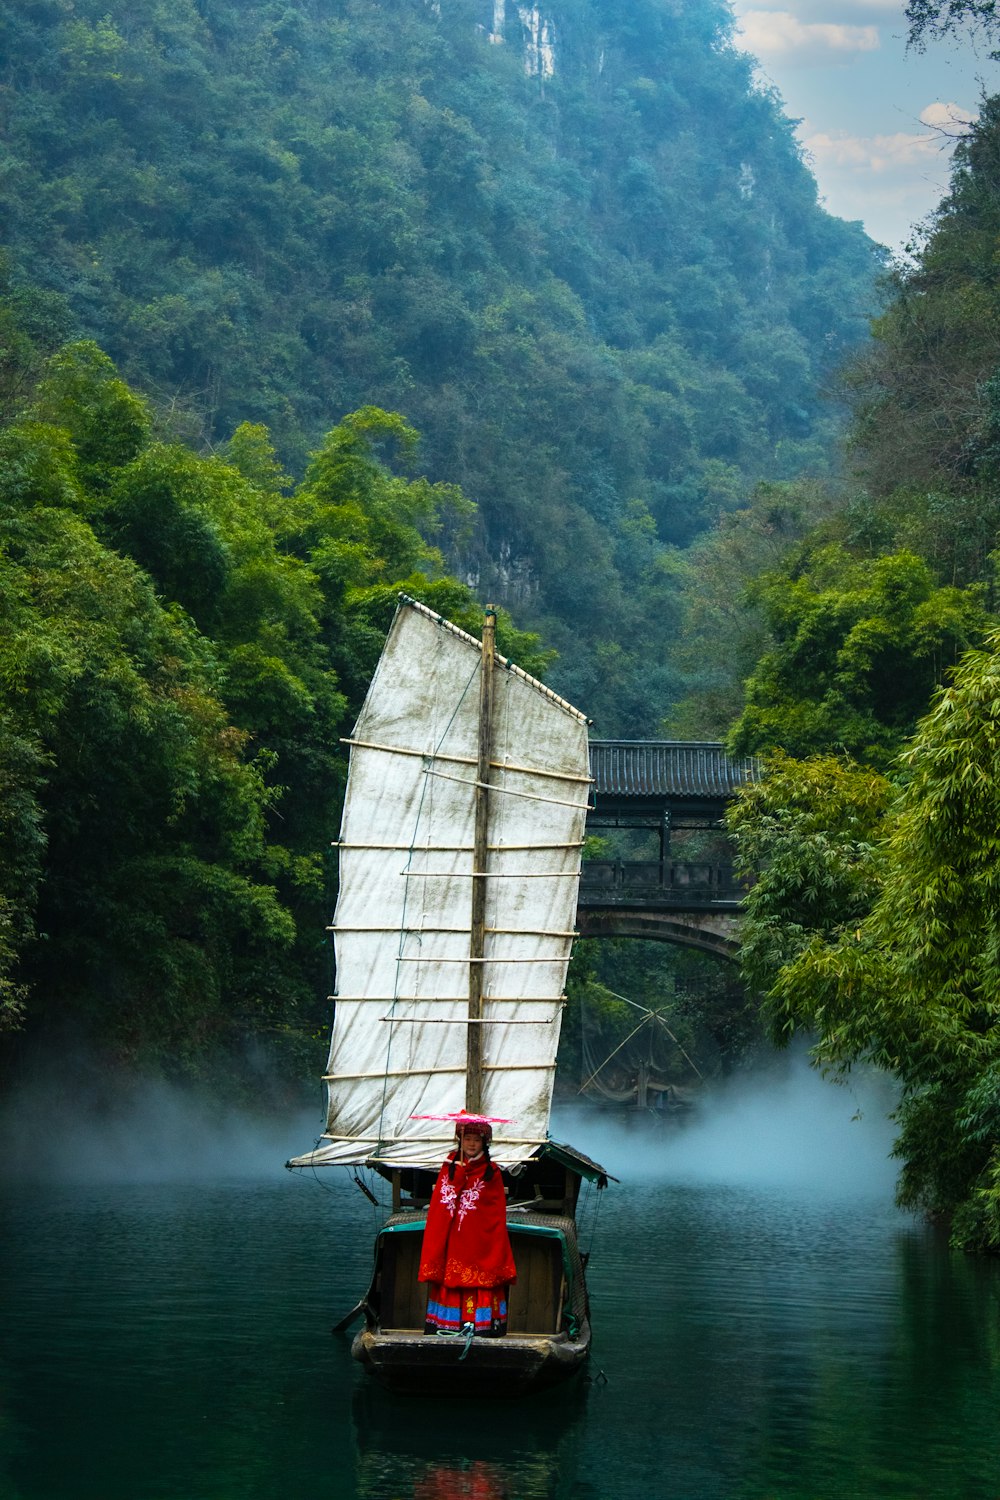 a person on a small boat in a river